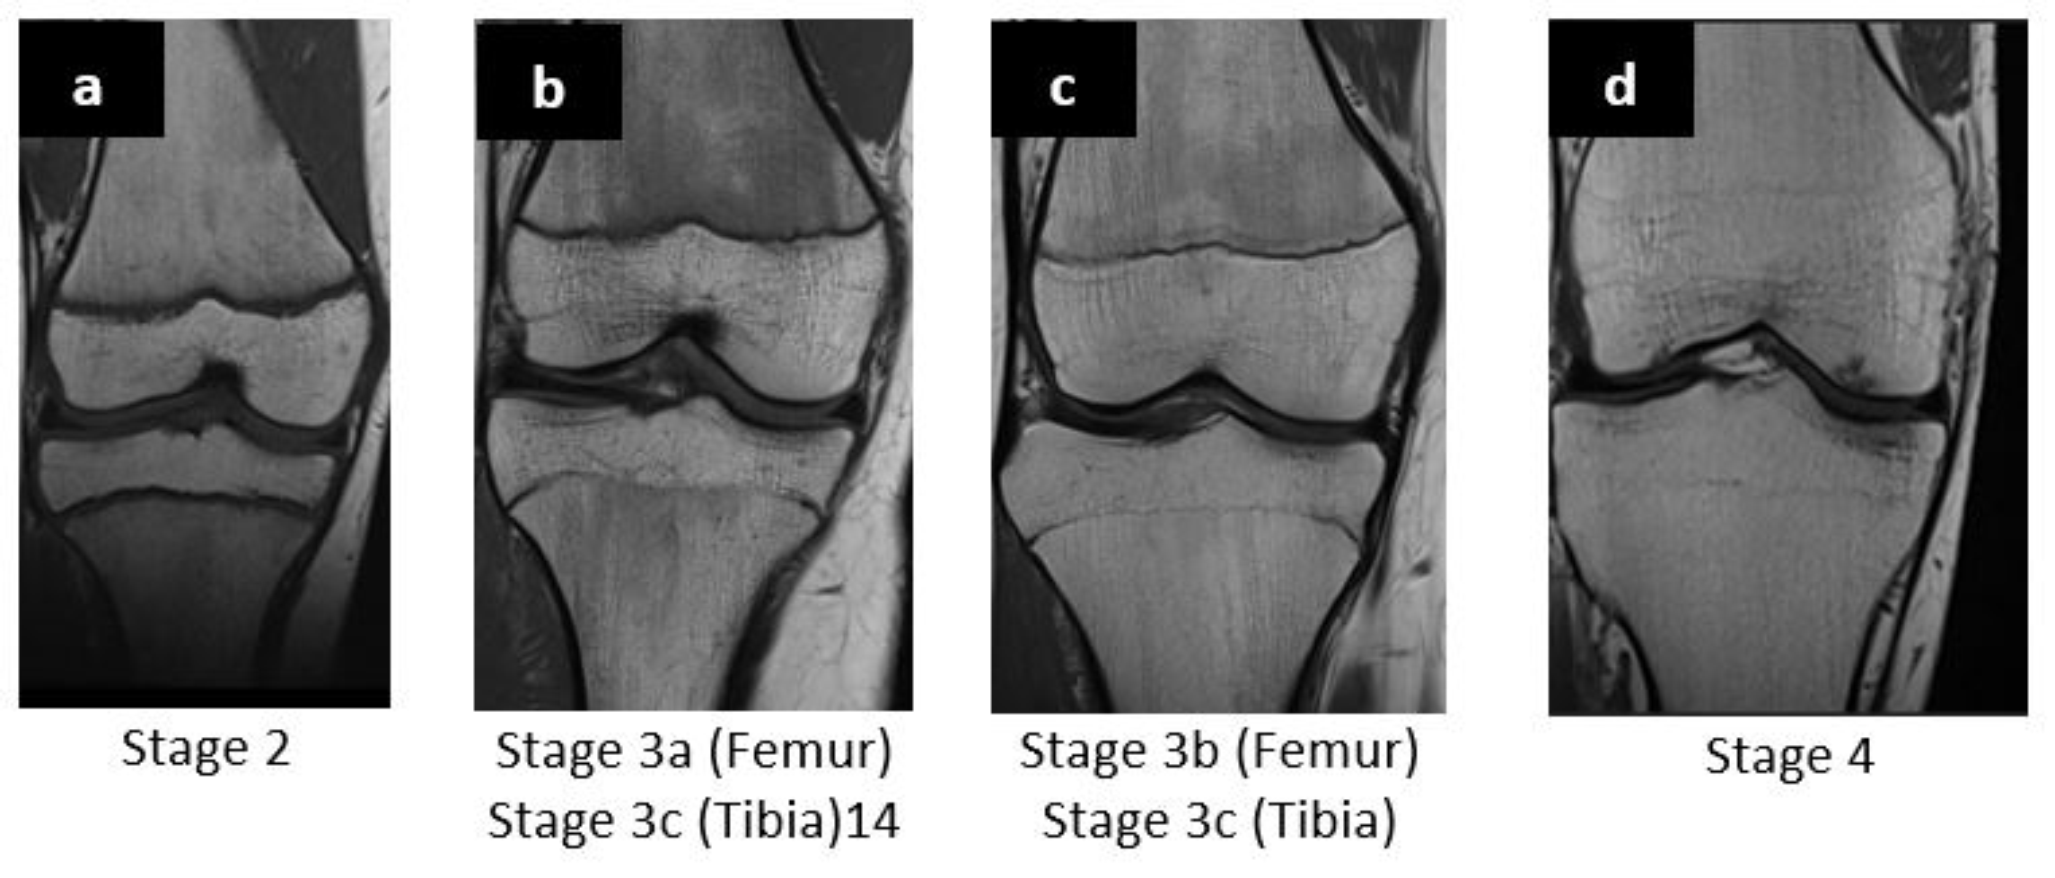 Forensic age estimation by MRI of the knee – comparison of two classifications for ossification stages in a German population